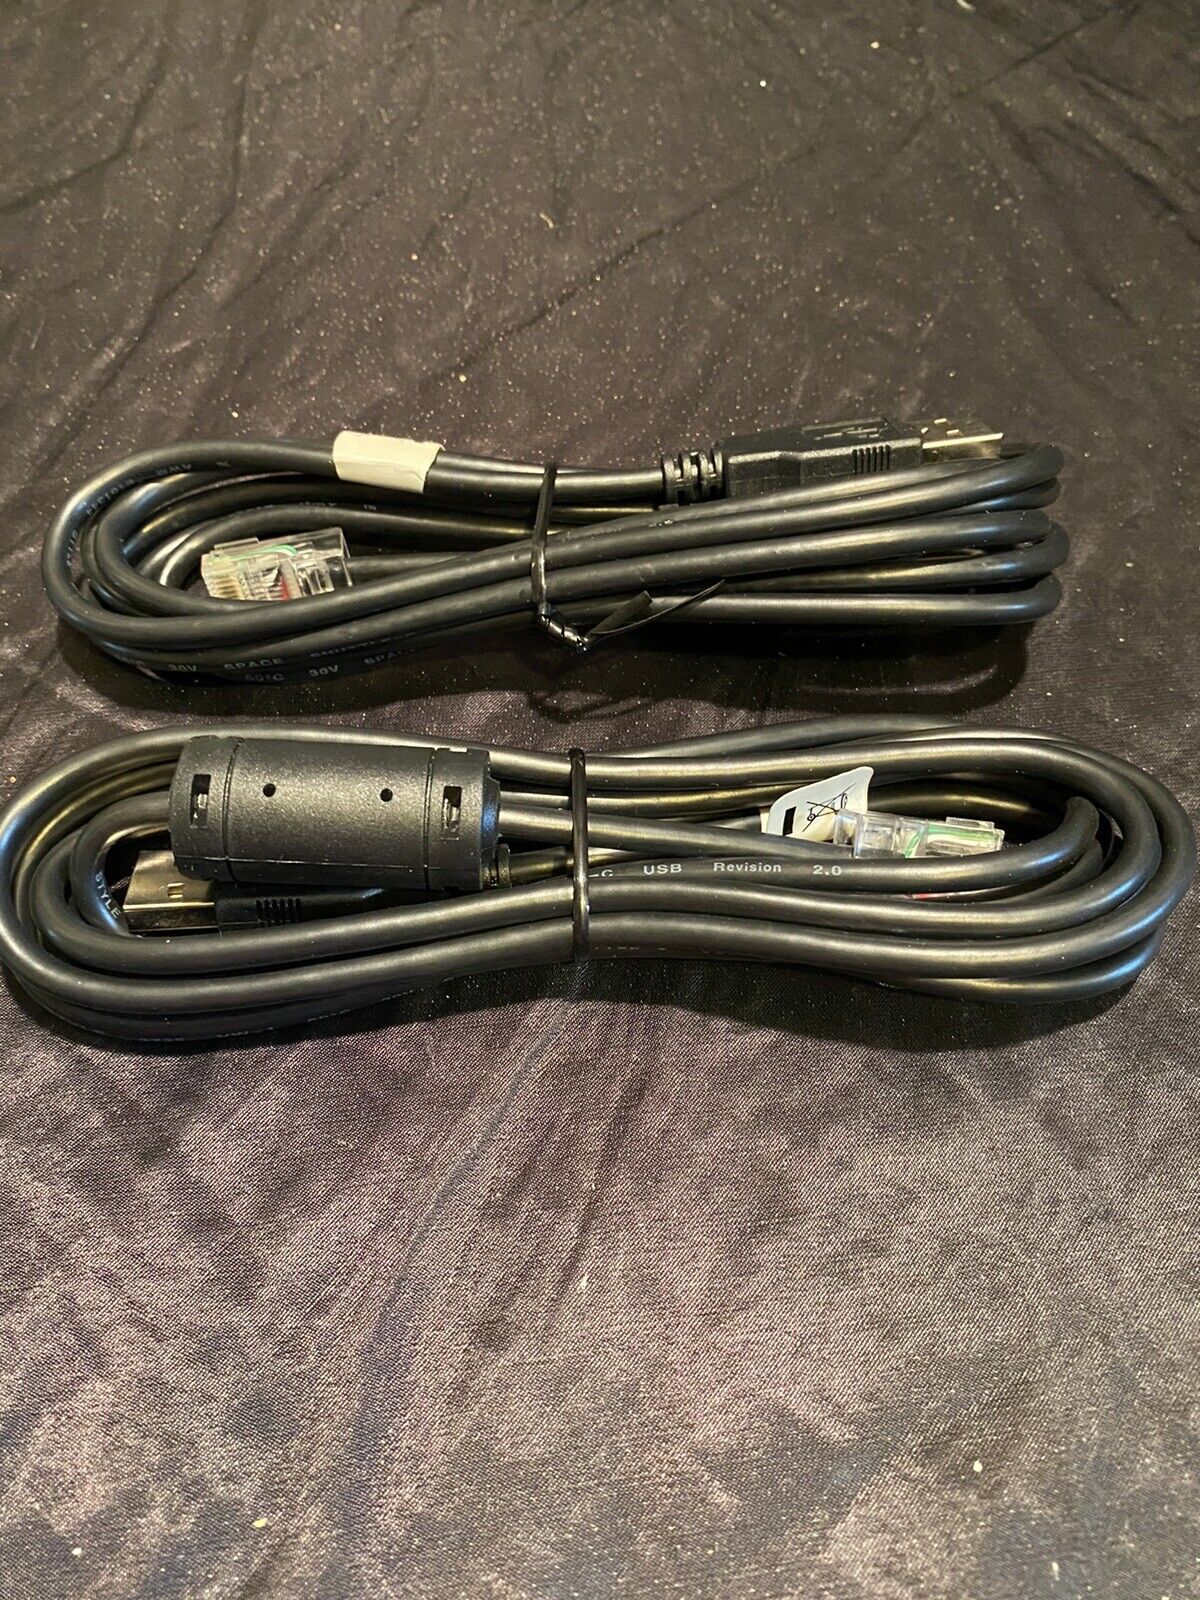 NEW Lot (2) Space Shuttle-C USB Cable E101344 Style 2725 60°C 28Awg 30V